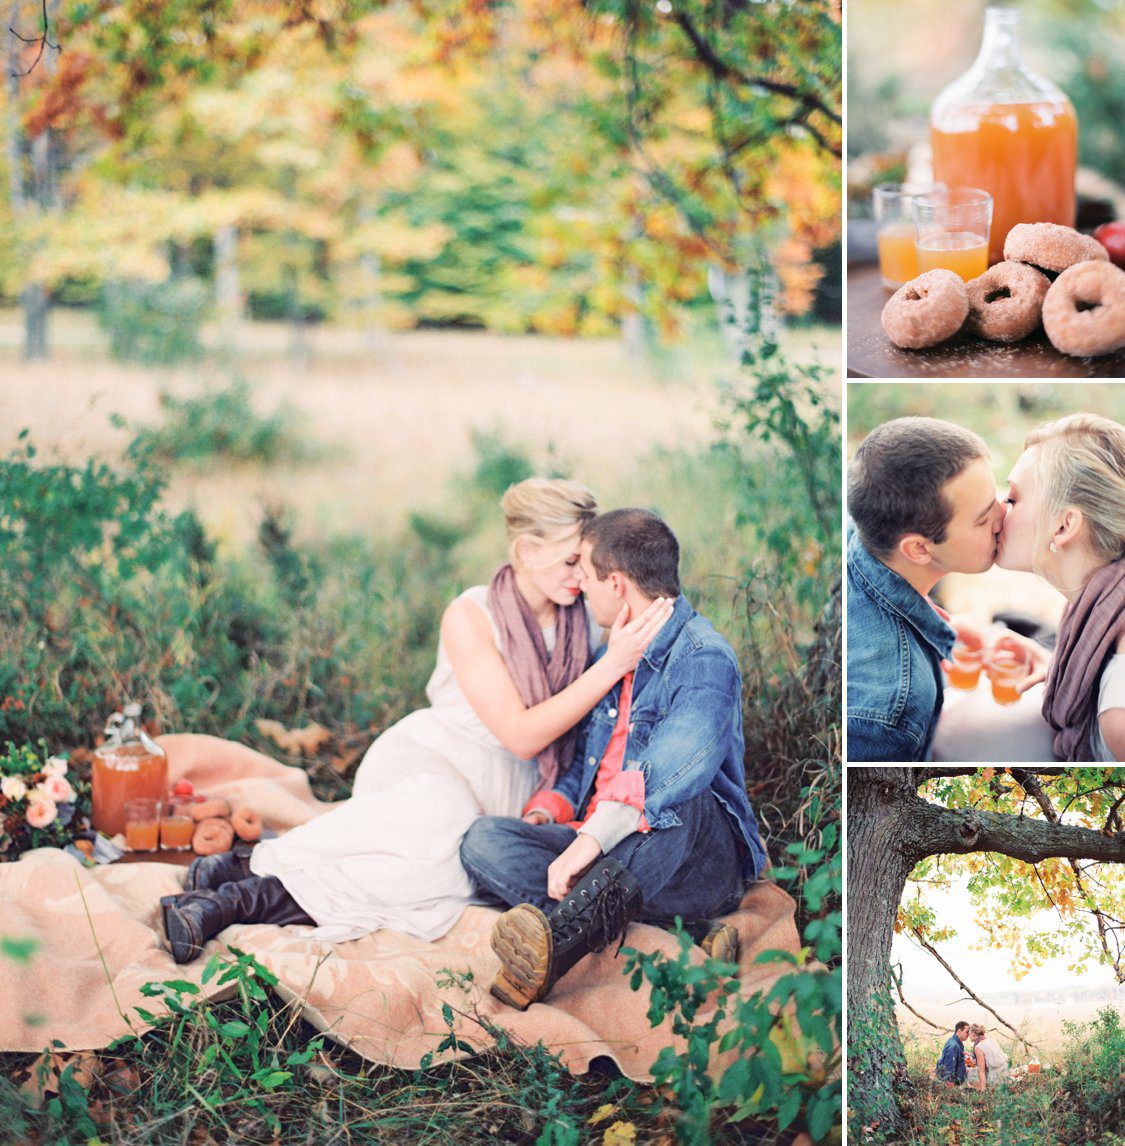 Autumn Engagement Session Styled | Cory Weber Photography | BLOOM Floral Design | Sincerely, Ginger Event Design & Production | Tableau Events